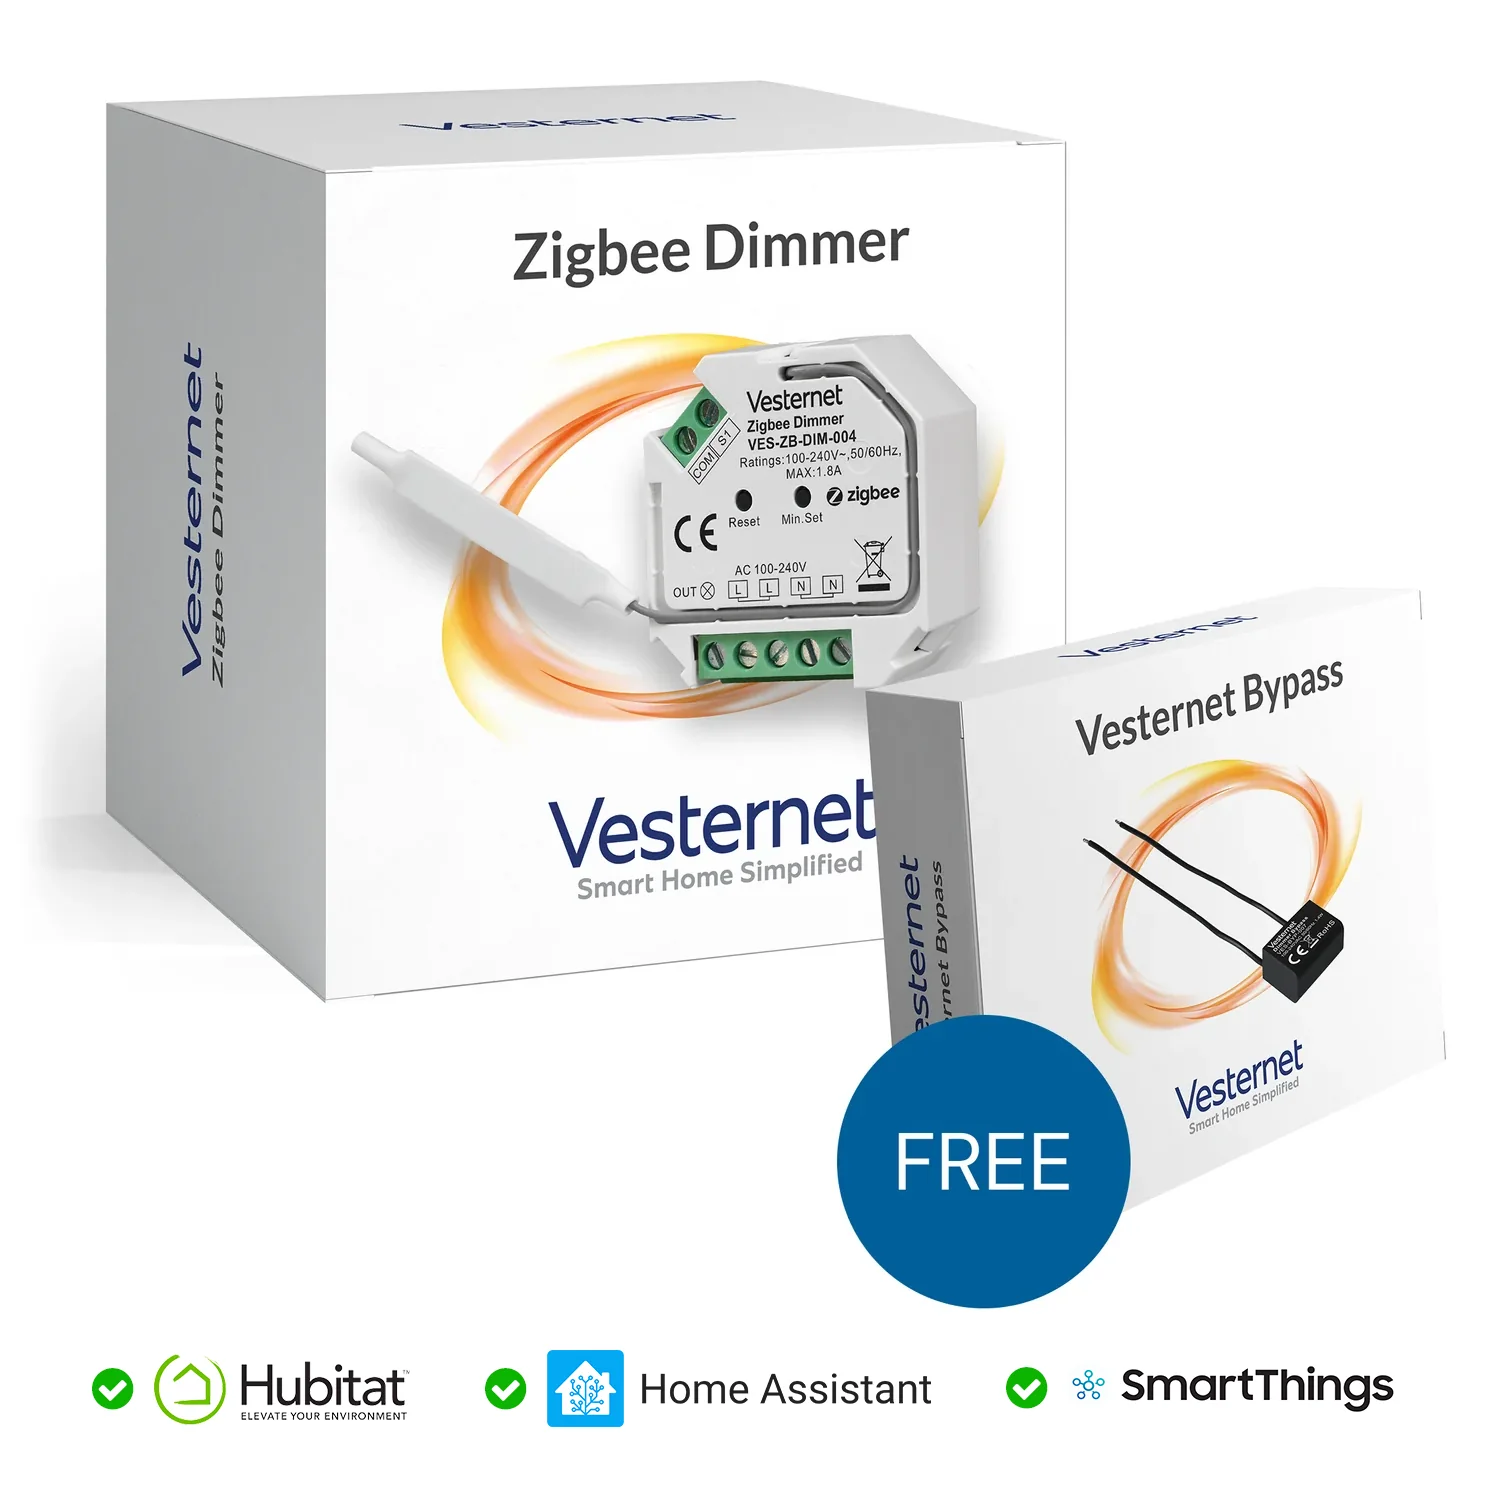 Does the Zigbee dimmer come with any included accessories?